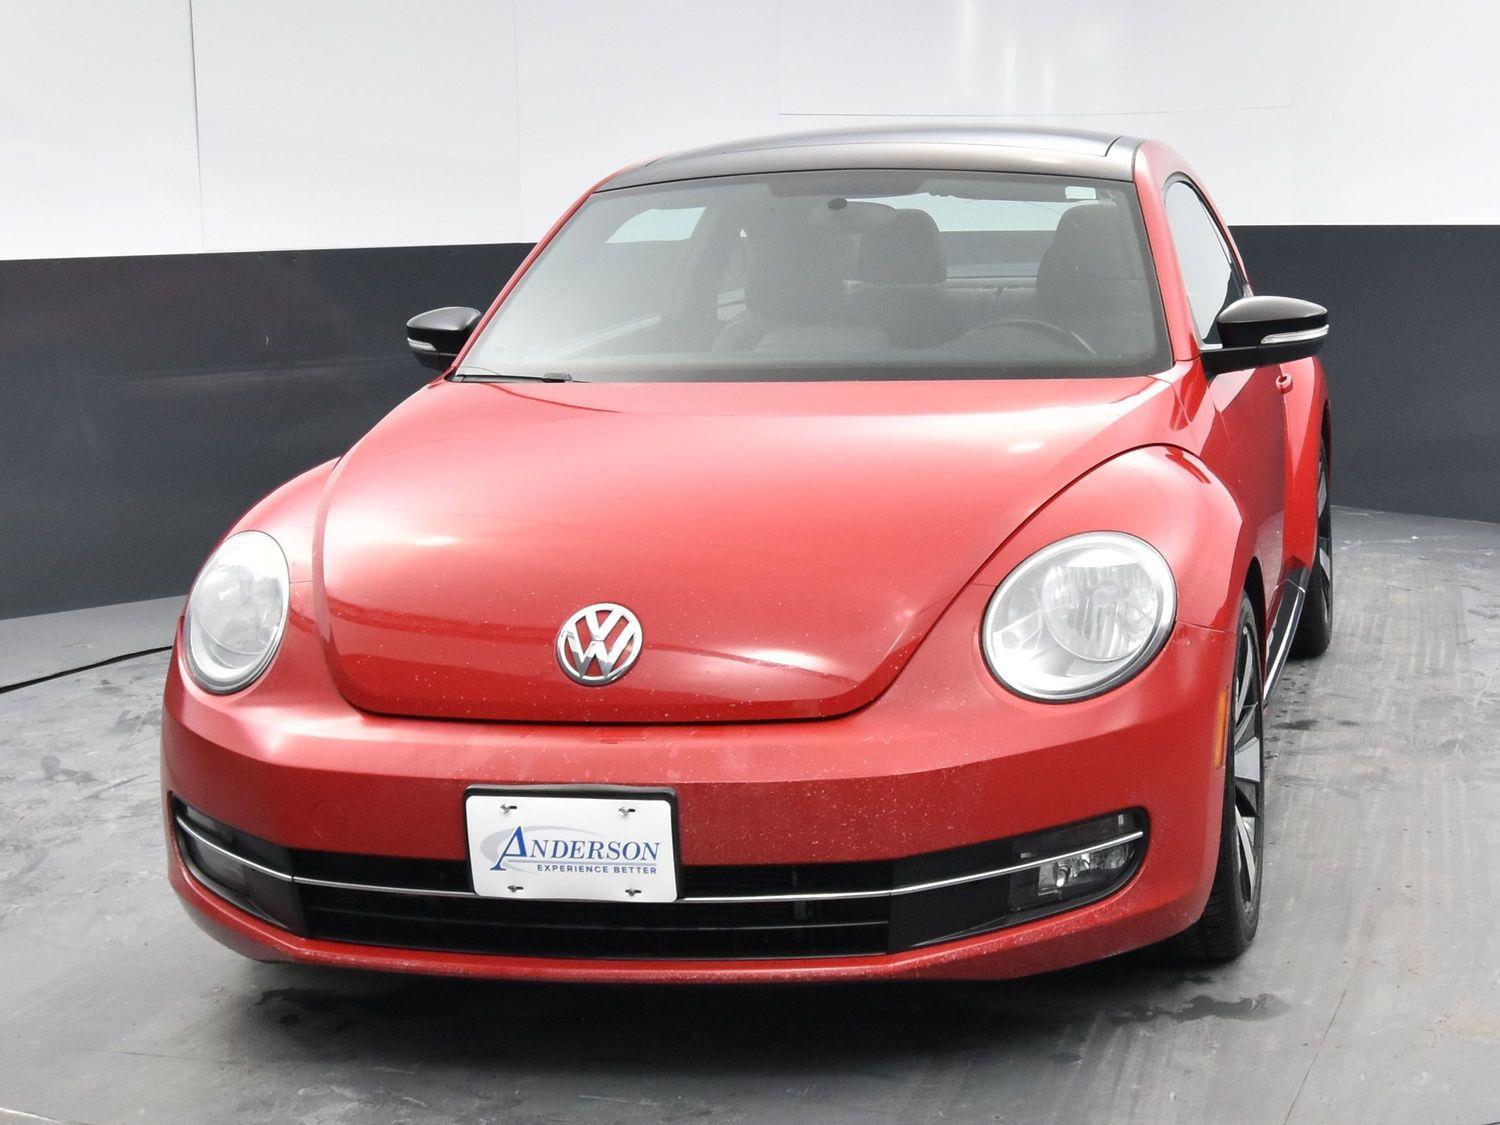 Used 2012 Volkswagen Beetle 2.0T Turbo w/Sun/Sound Coupe for sale in Grand Island NE